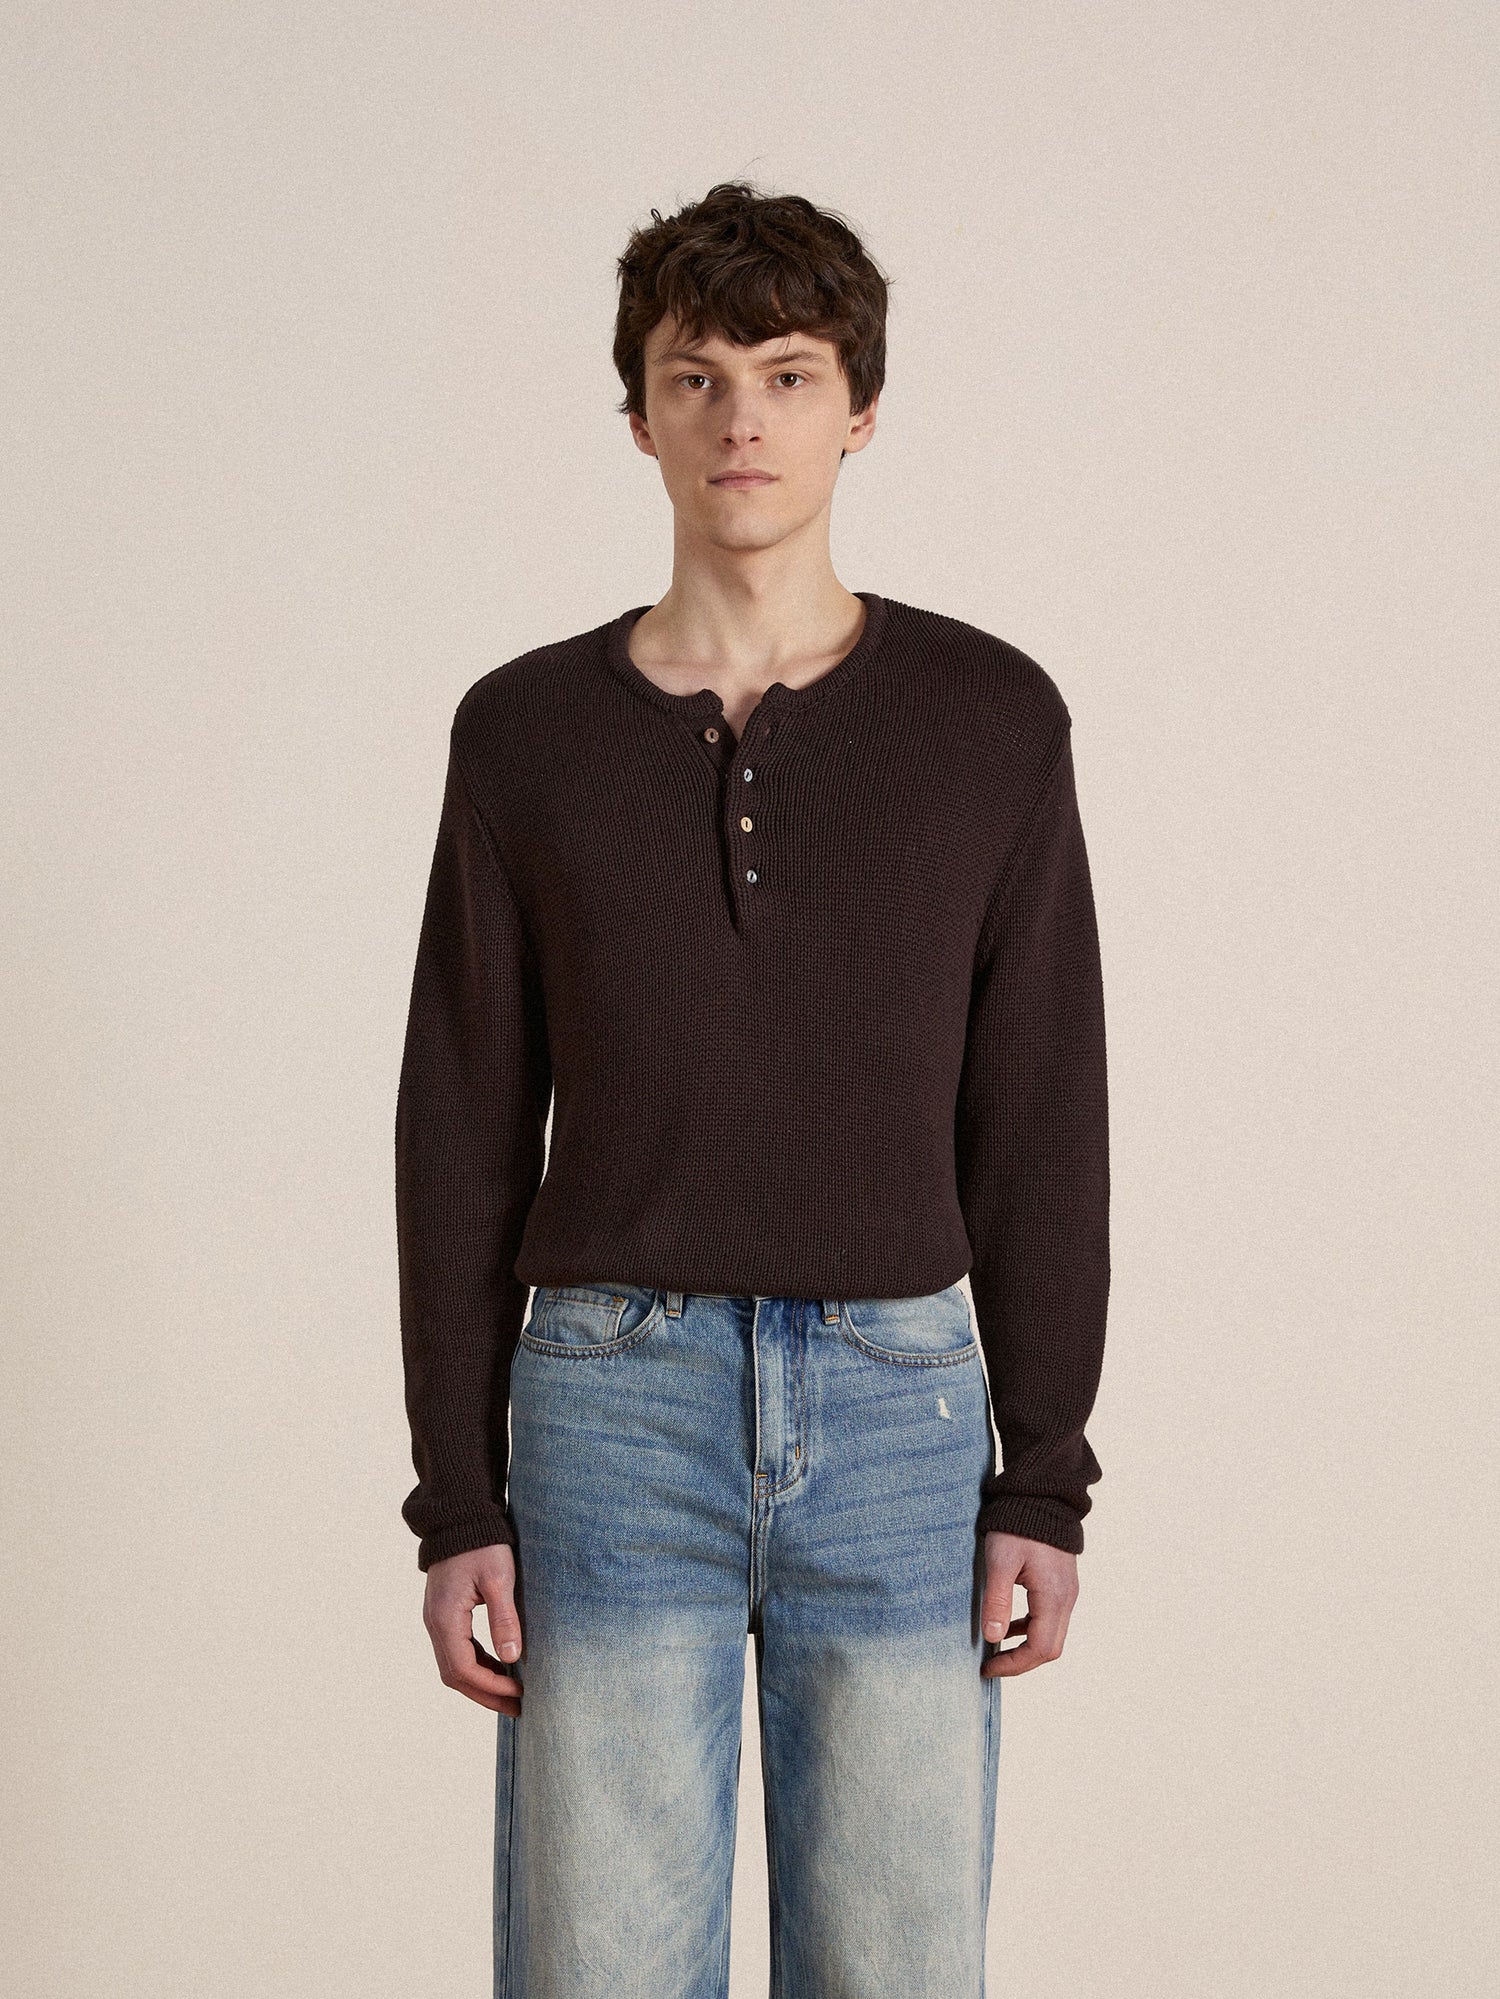 A man wearing a brown Profound knit Henley sweater and blue jeans.